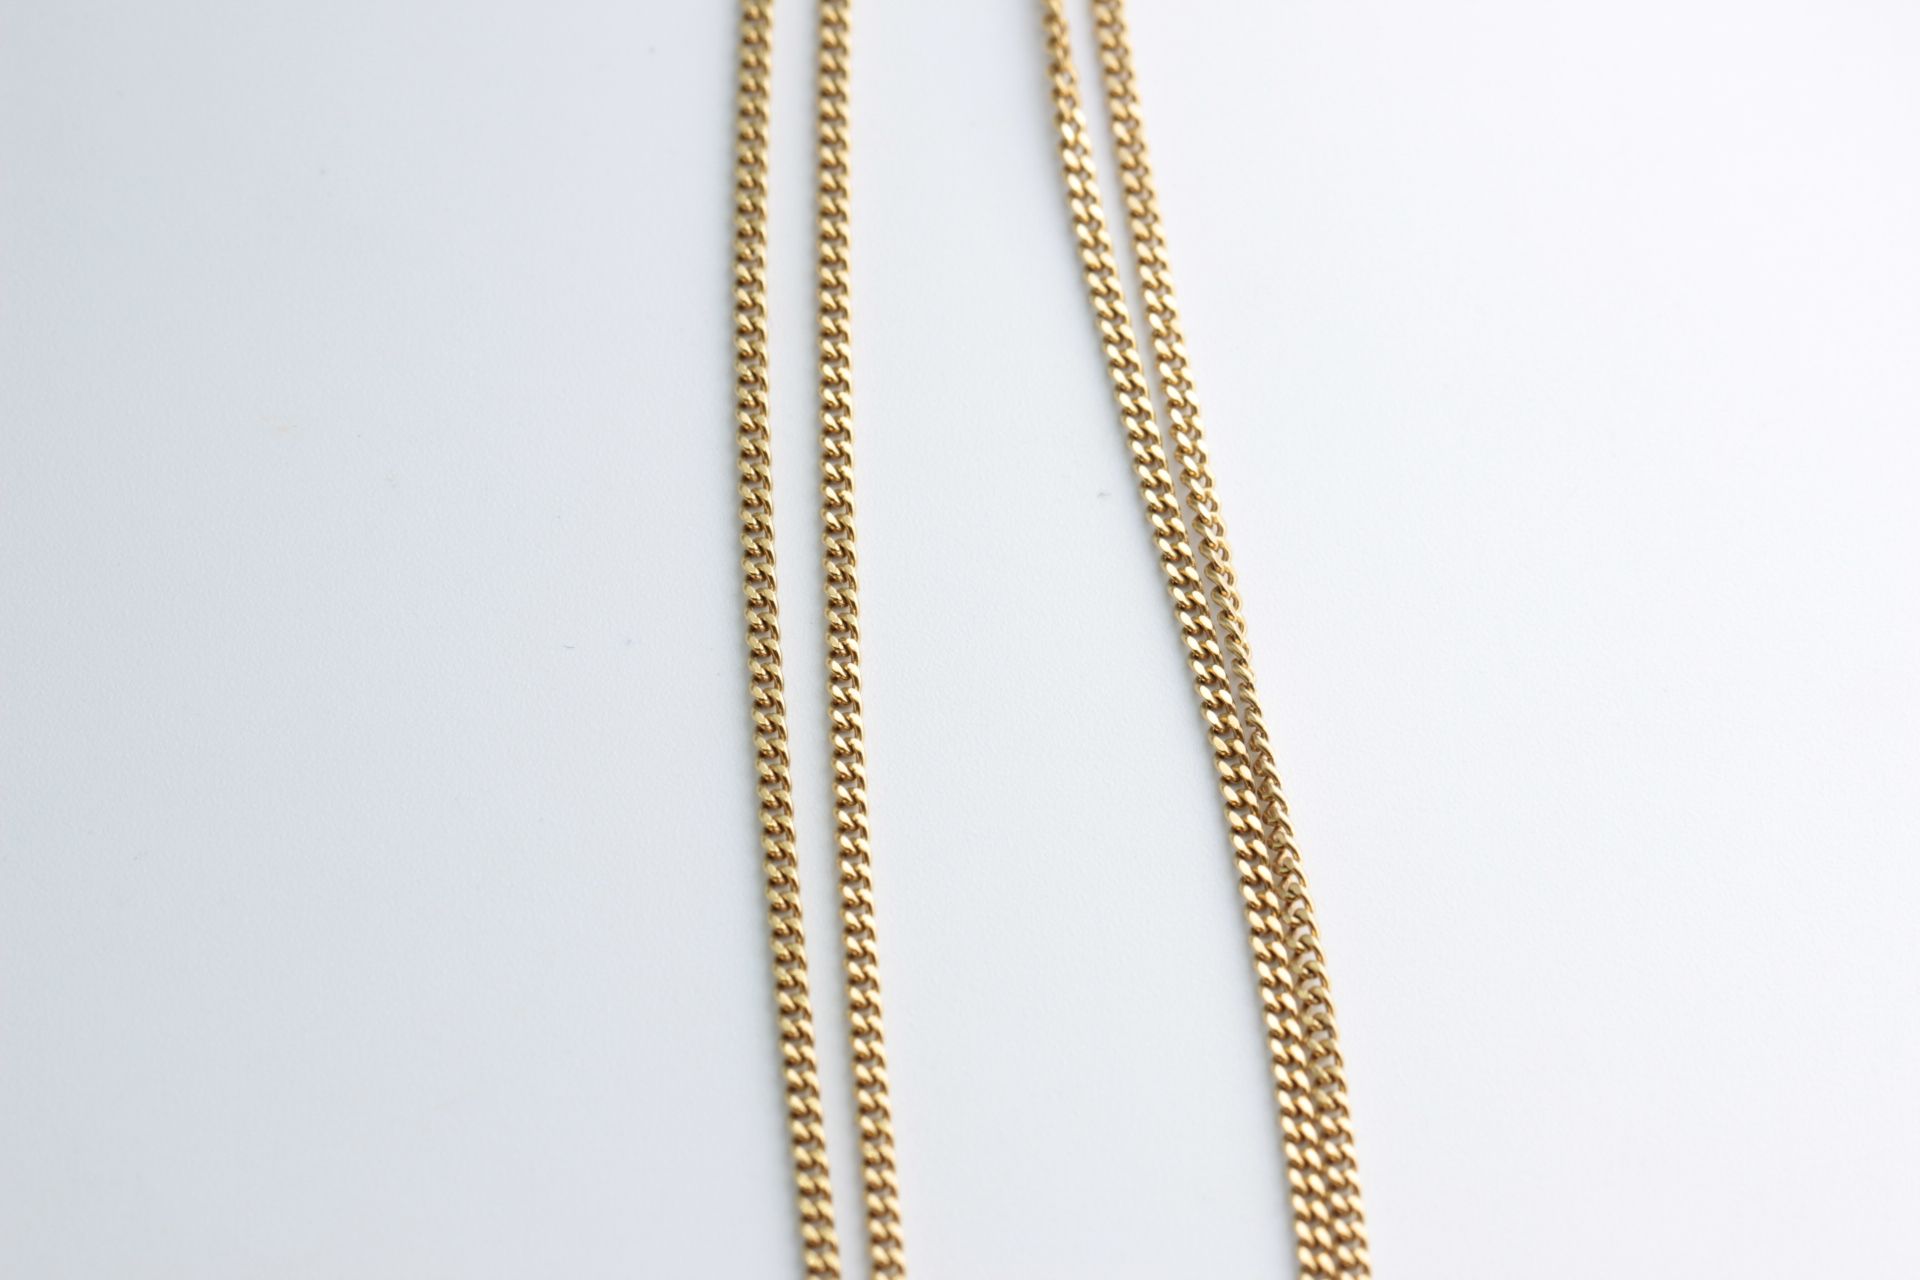 Necklace / Chain / Flat Curb Chain 62cm 24.4 inches